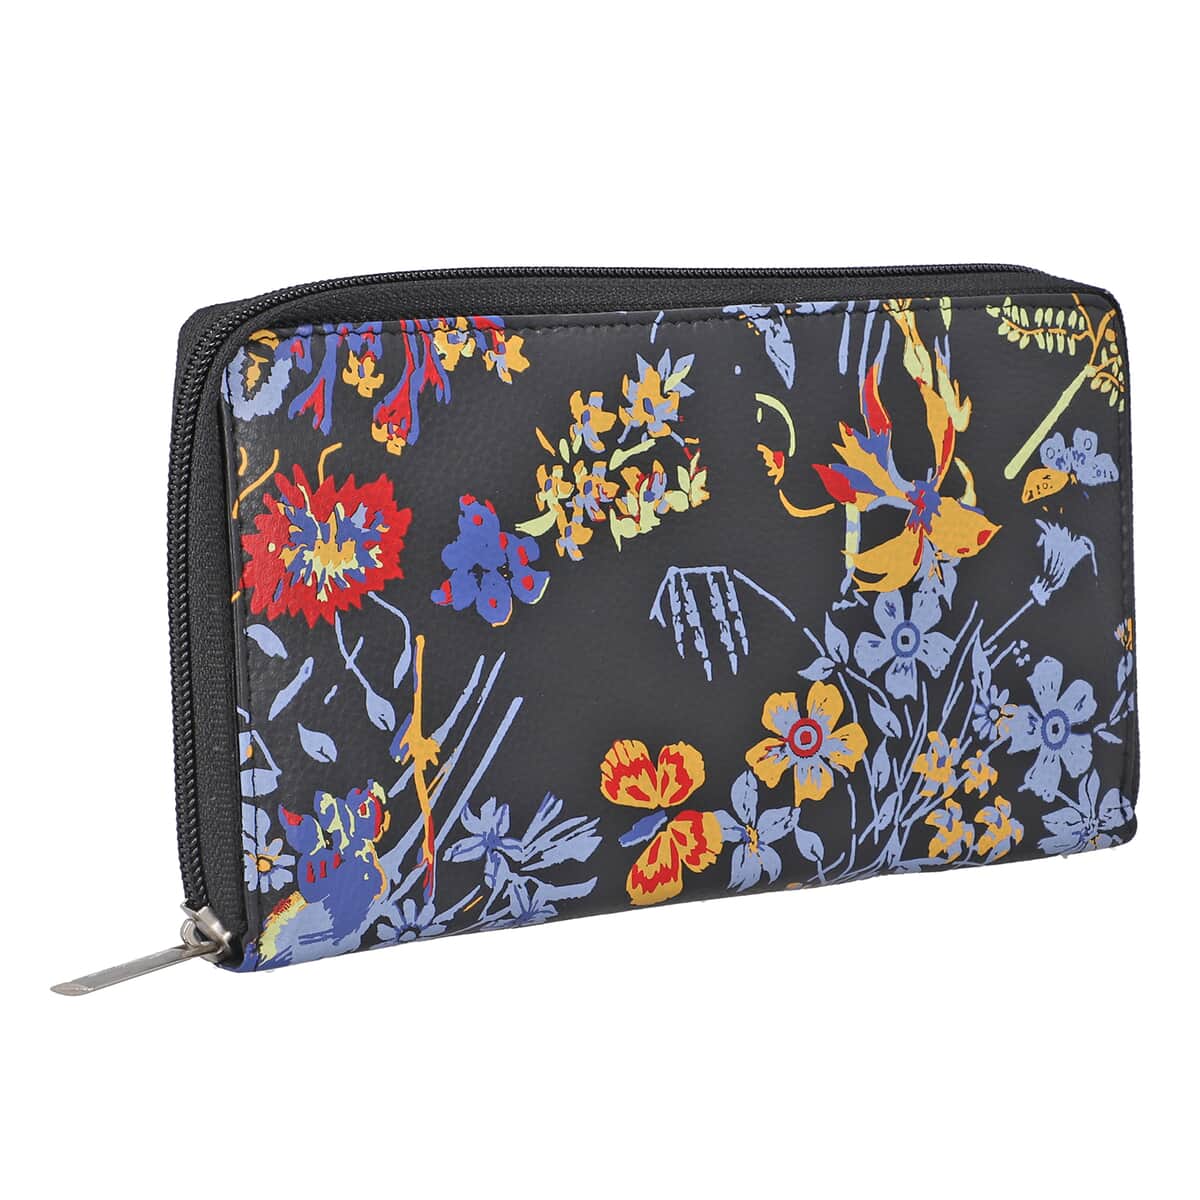 "UNION CODE -RFID Protected 100% Genuine Leather Women's Wallet THEME: Flower print  SIZE: 7.5(L)x4.5(W)x0.5(H) inches COLOR: Black " image number 6